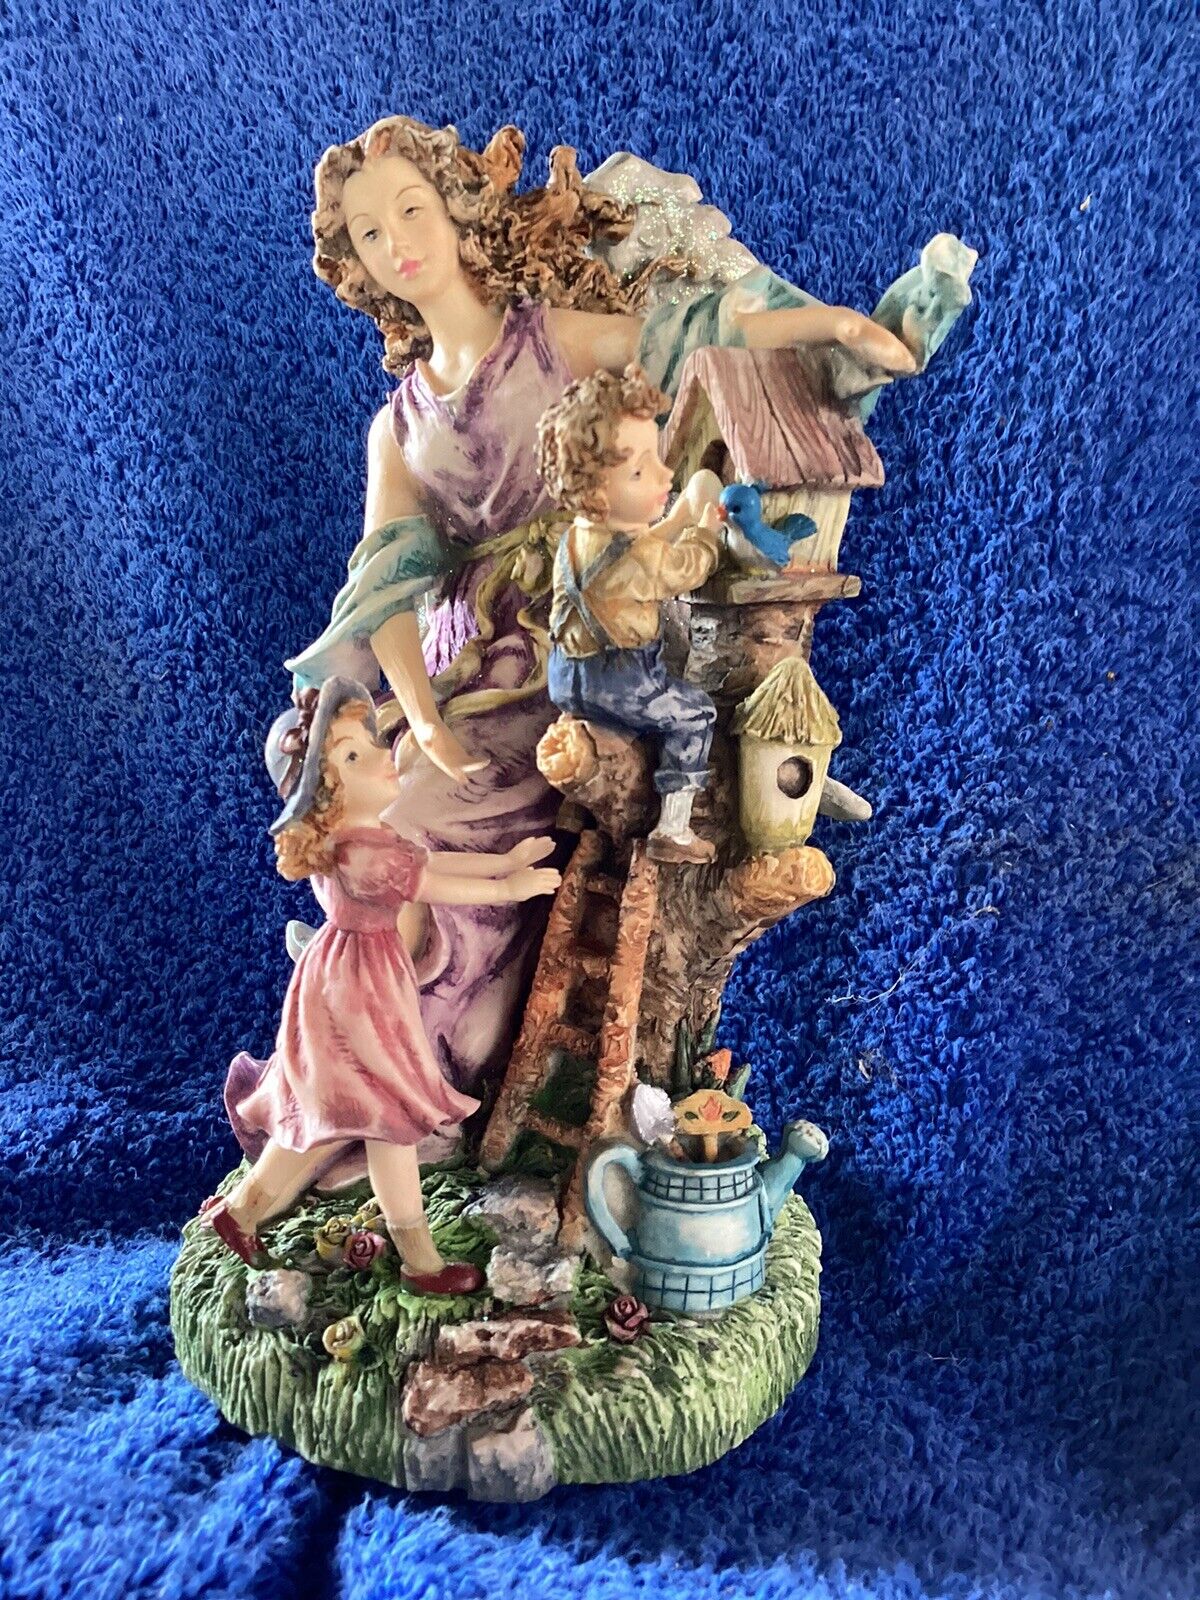 Guardian Angel With Children Figurine Musical Box, Plays Welcome To My World 